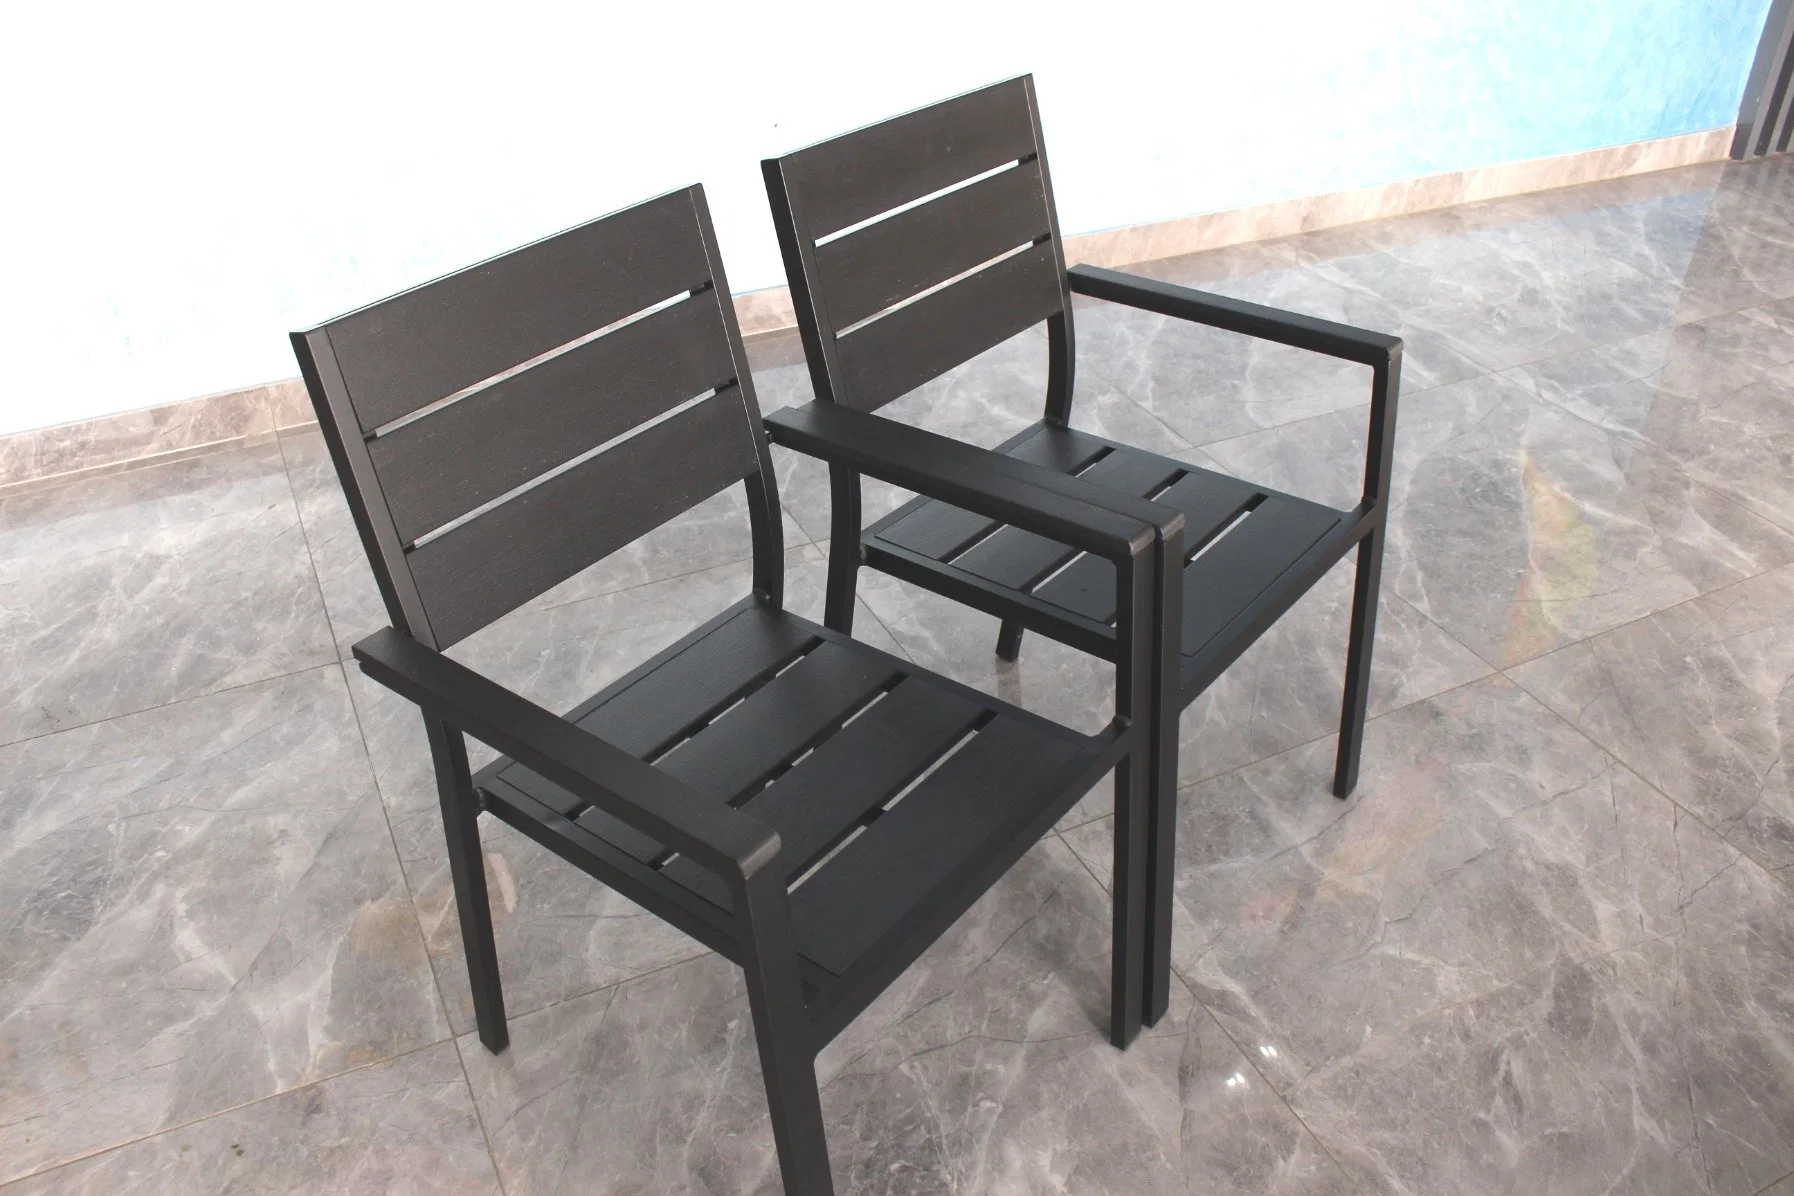 Outdoor Furniture Wood 4 Chairs Plastic Wood Dining Table Chairs Set